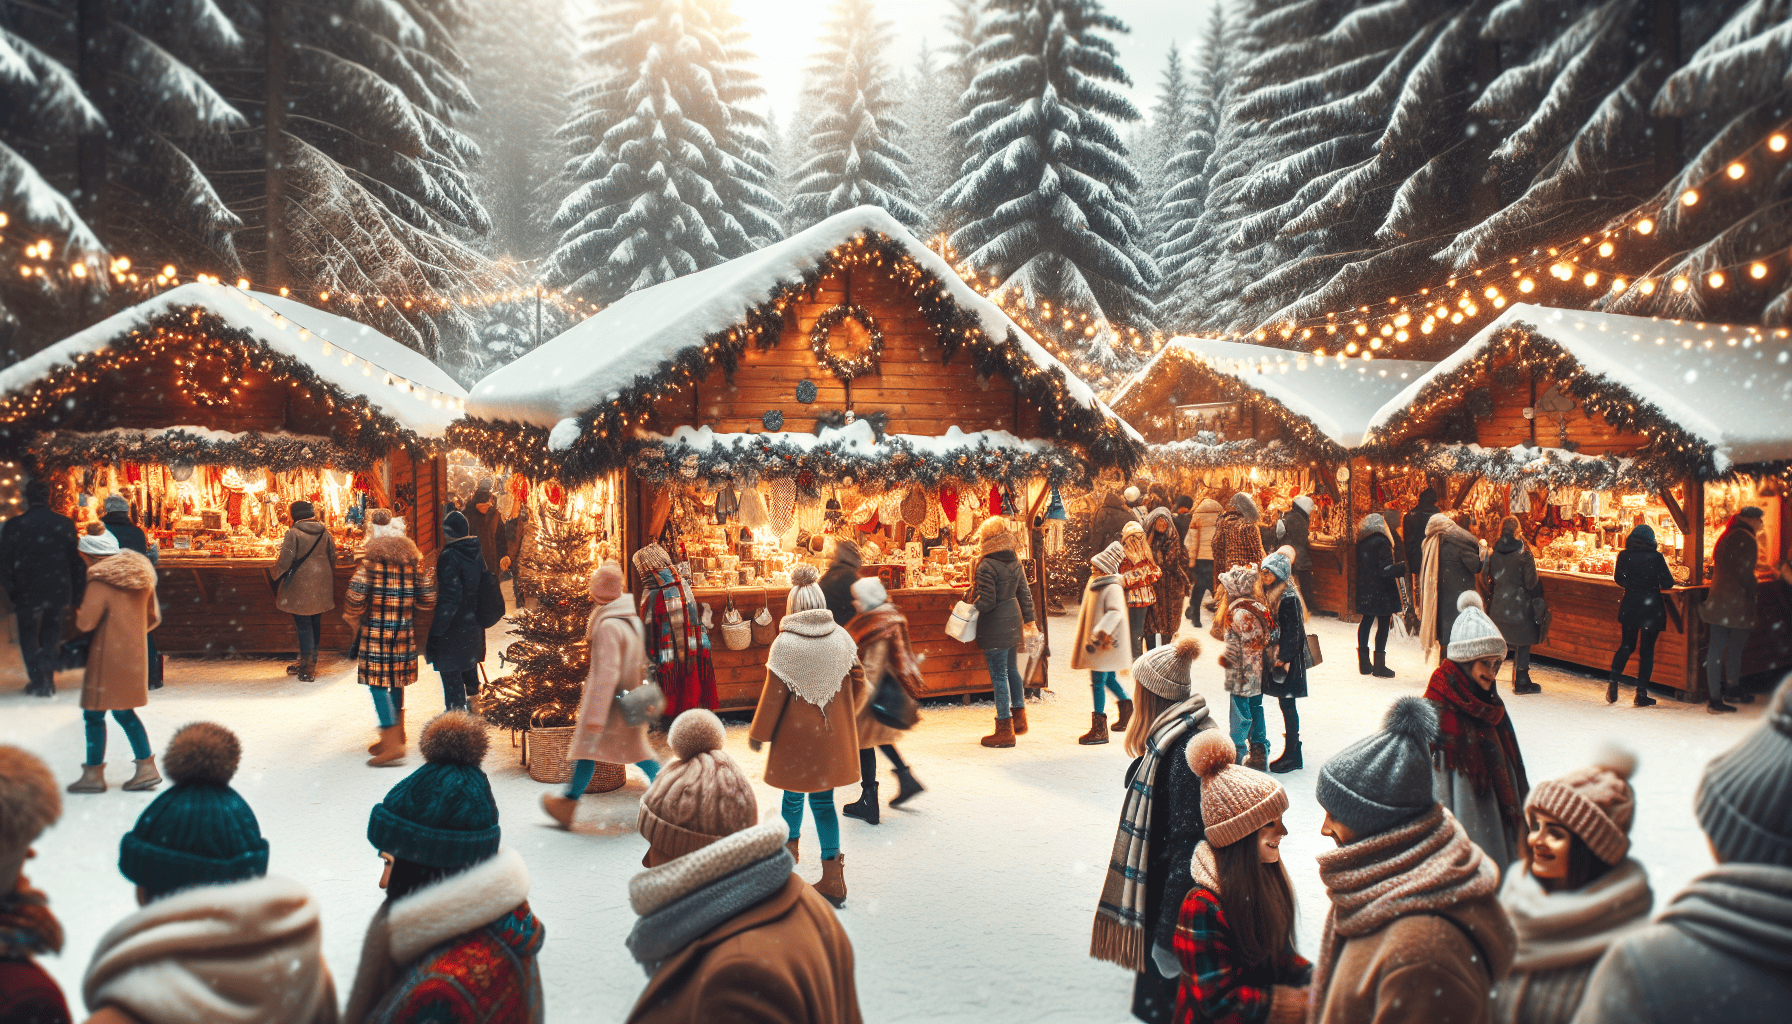 A festive Christmas market with colorful stalls and decorations